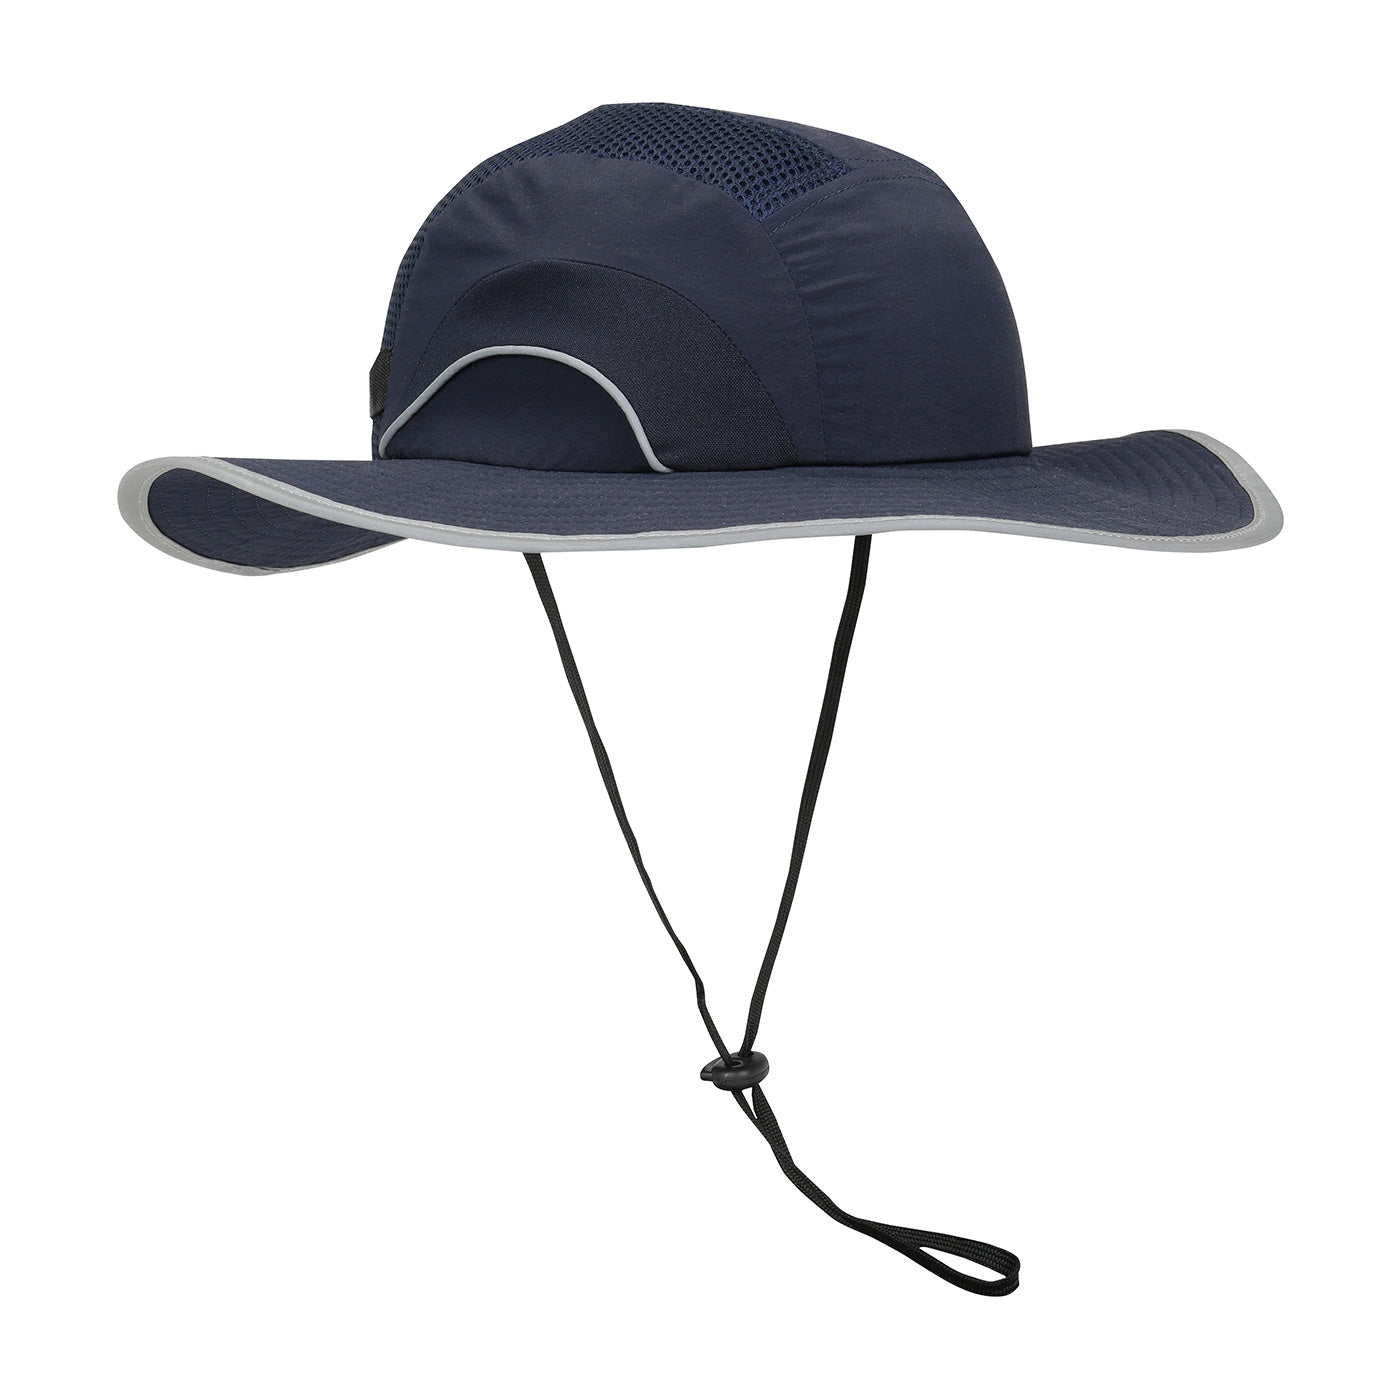 JSP 282-AFB375-21 Ranger Style Bump Cap with HDPE Protective Liner, Adjustable Back and Chin Strap